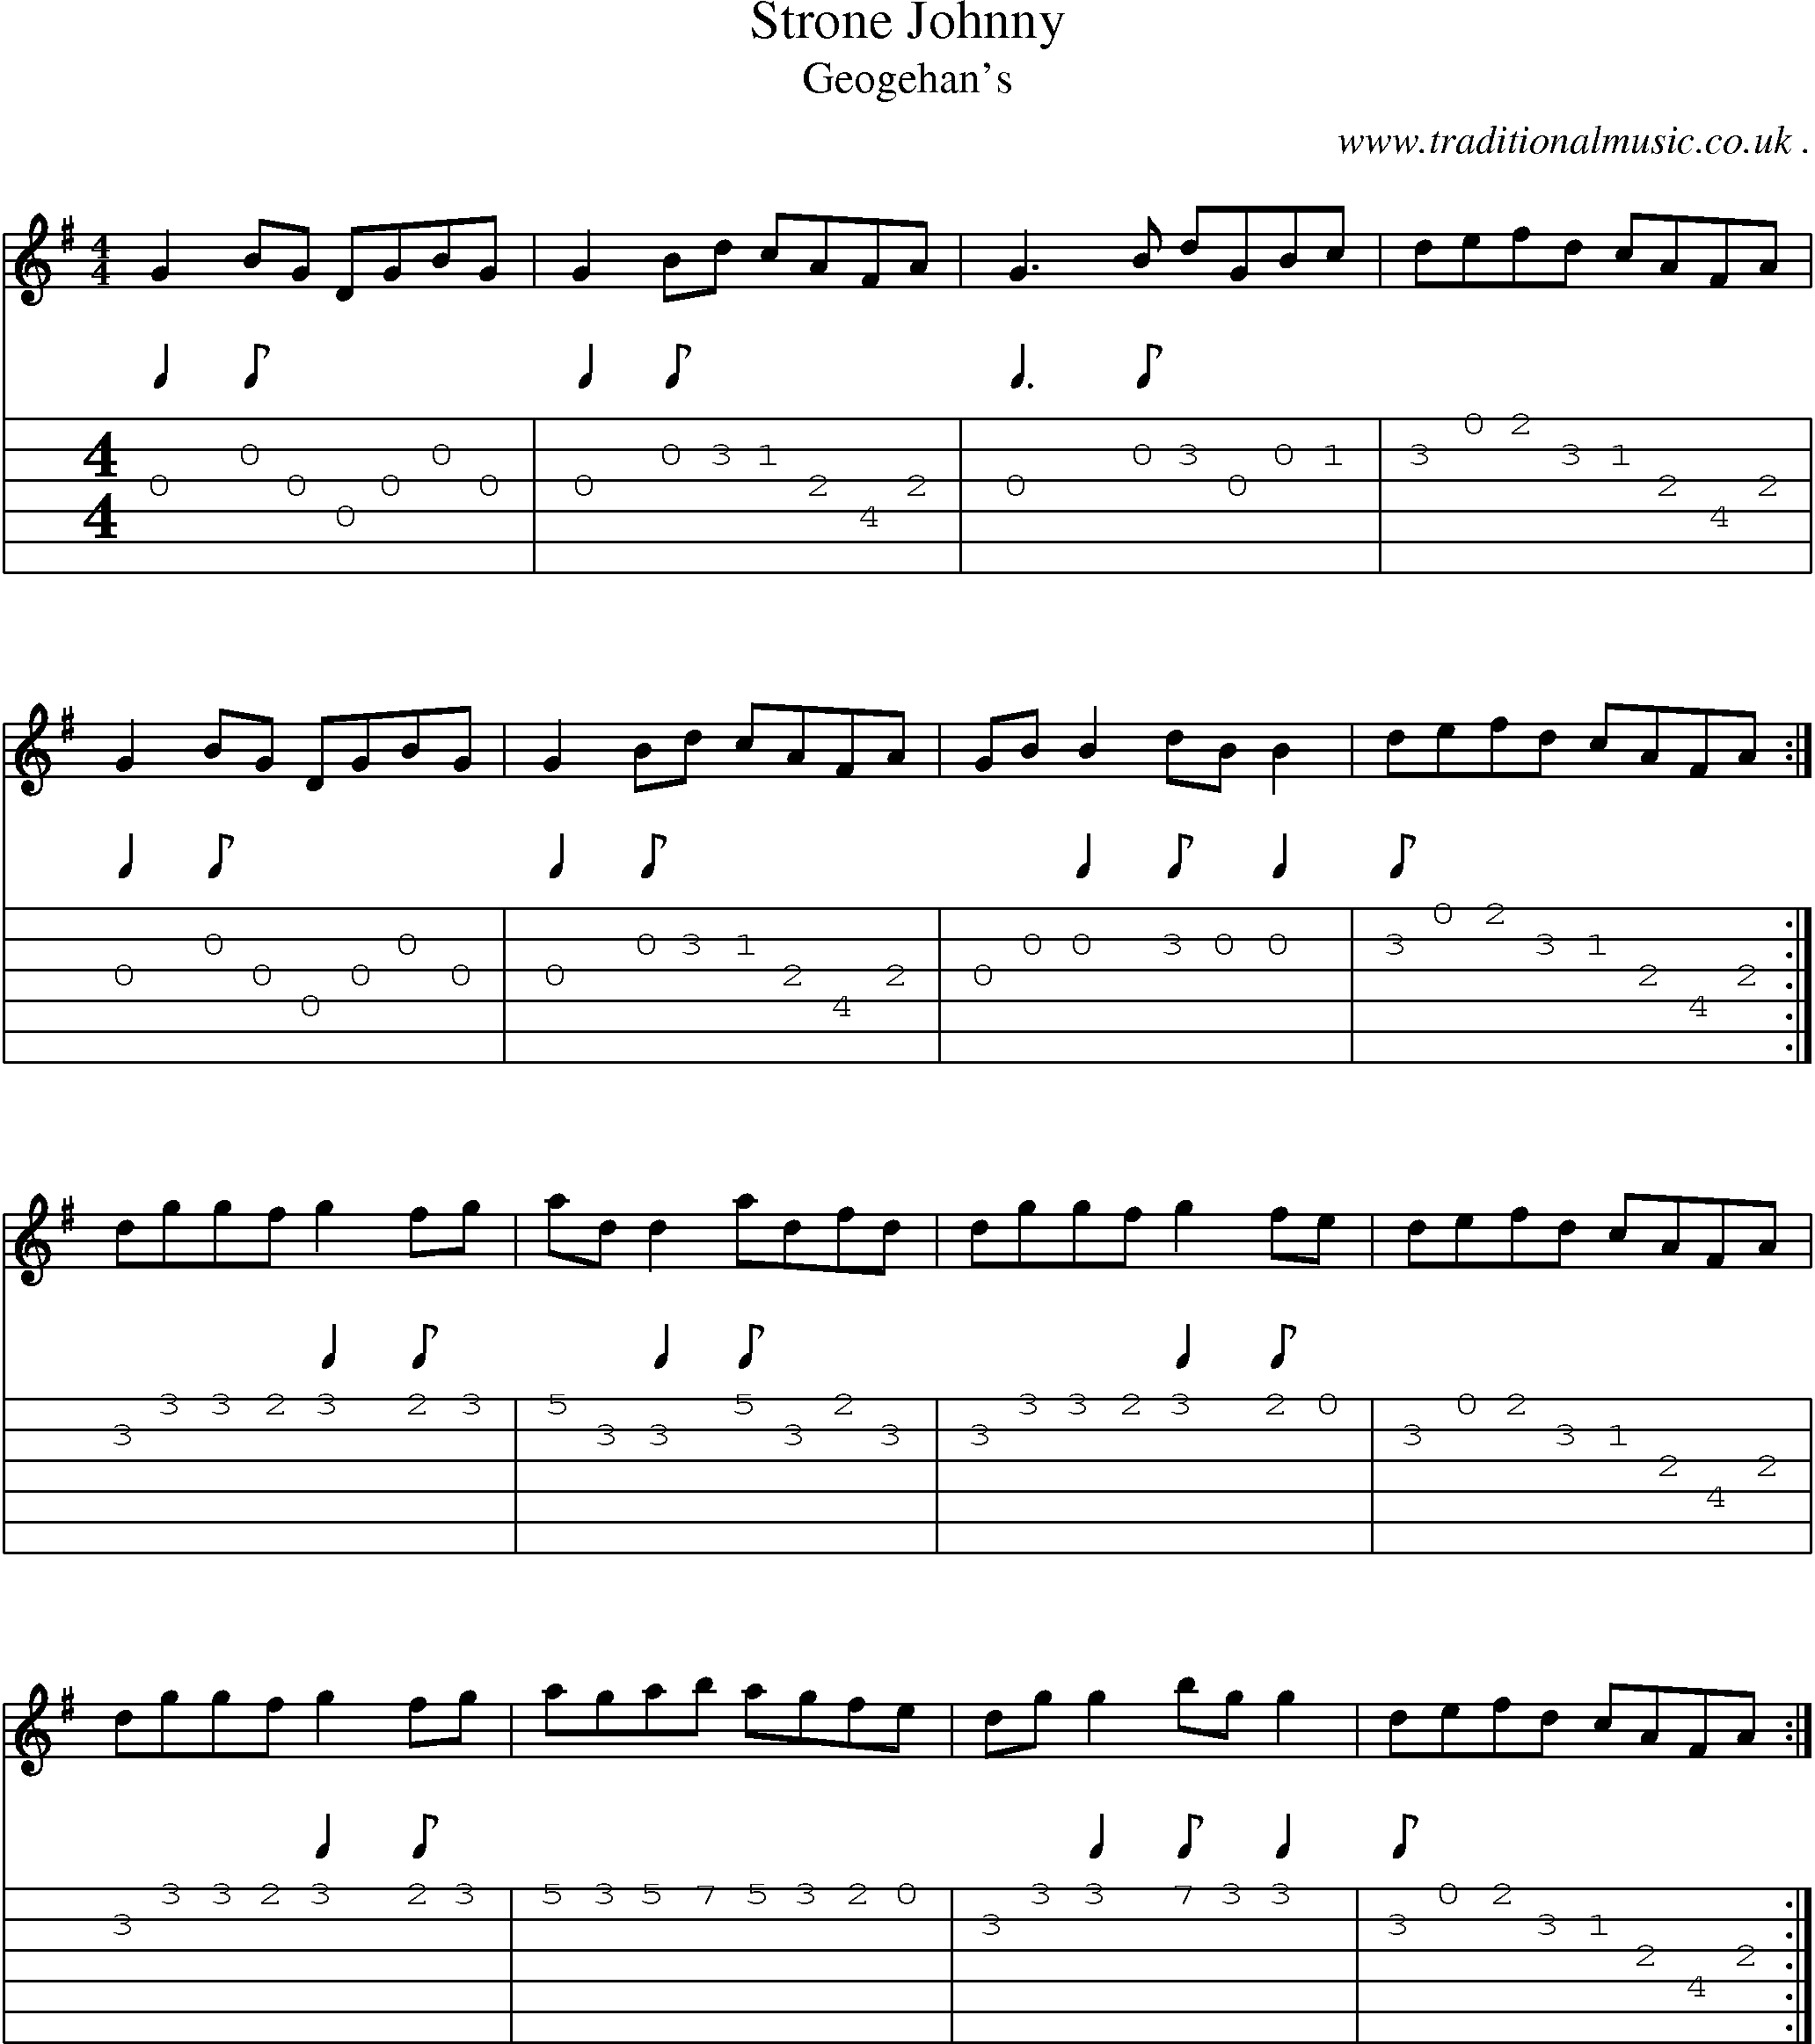 Sheet-Music and Guitar Tabs for Strone Johnny